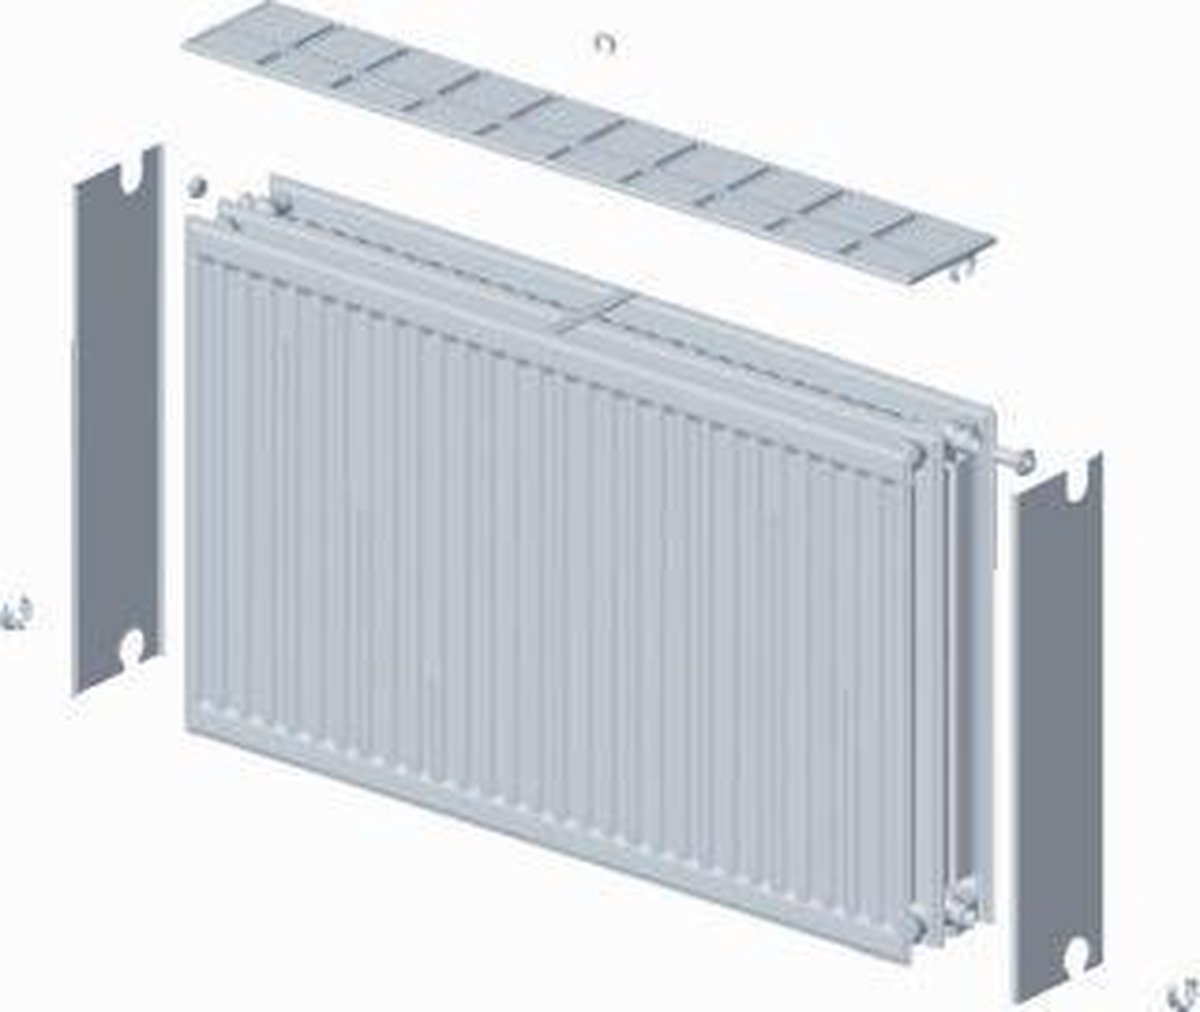 Stelrad paneelradiator Novello, staal, wit, (hxlxd) 300x1000x158mm, 33